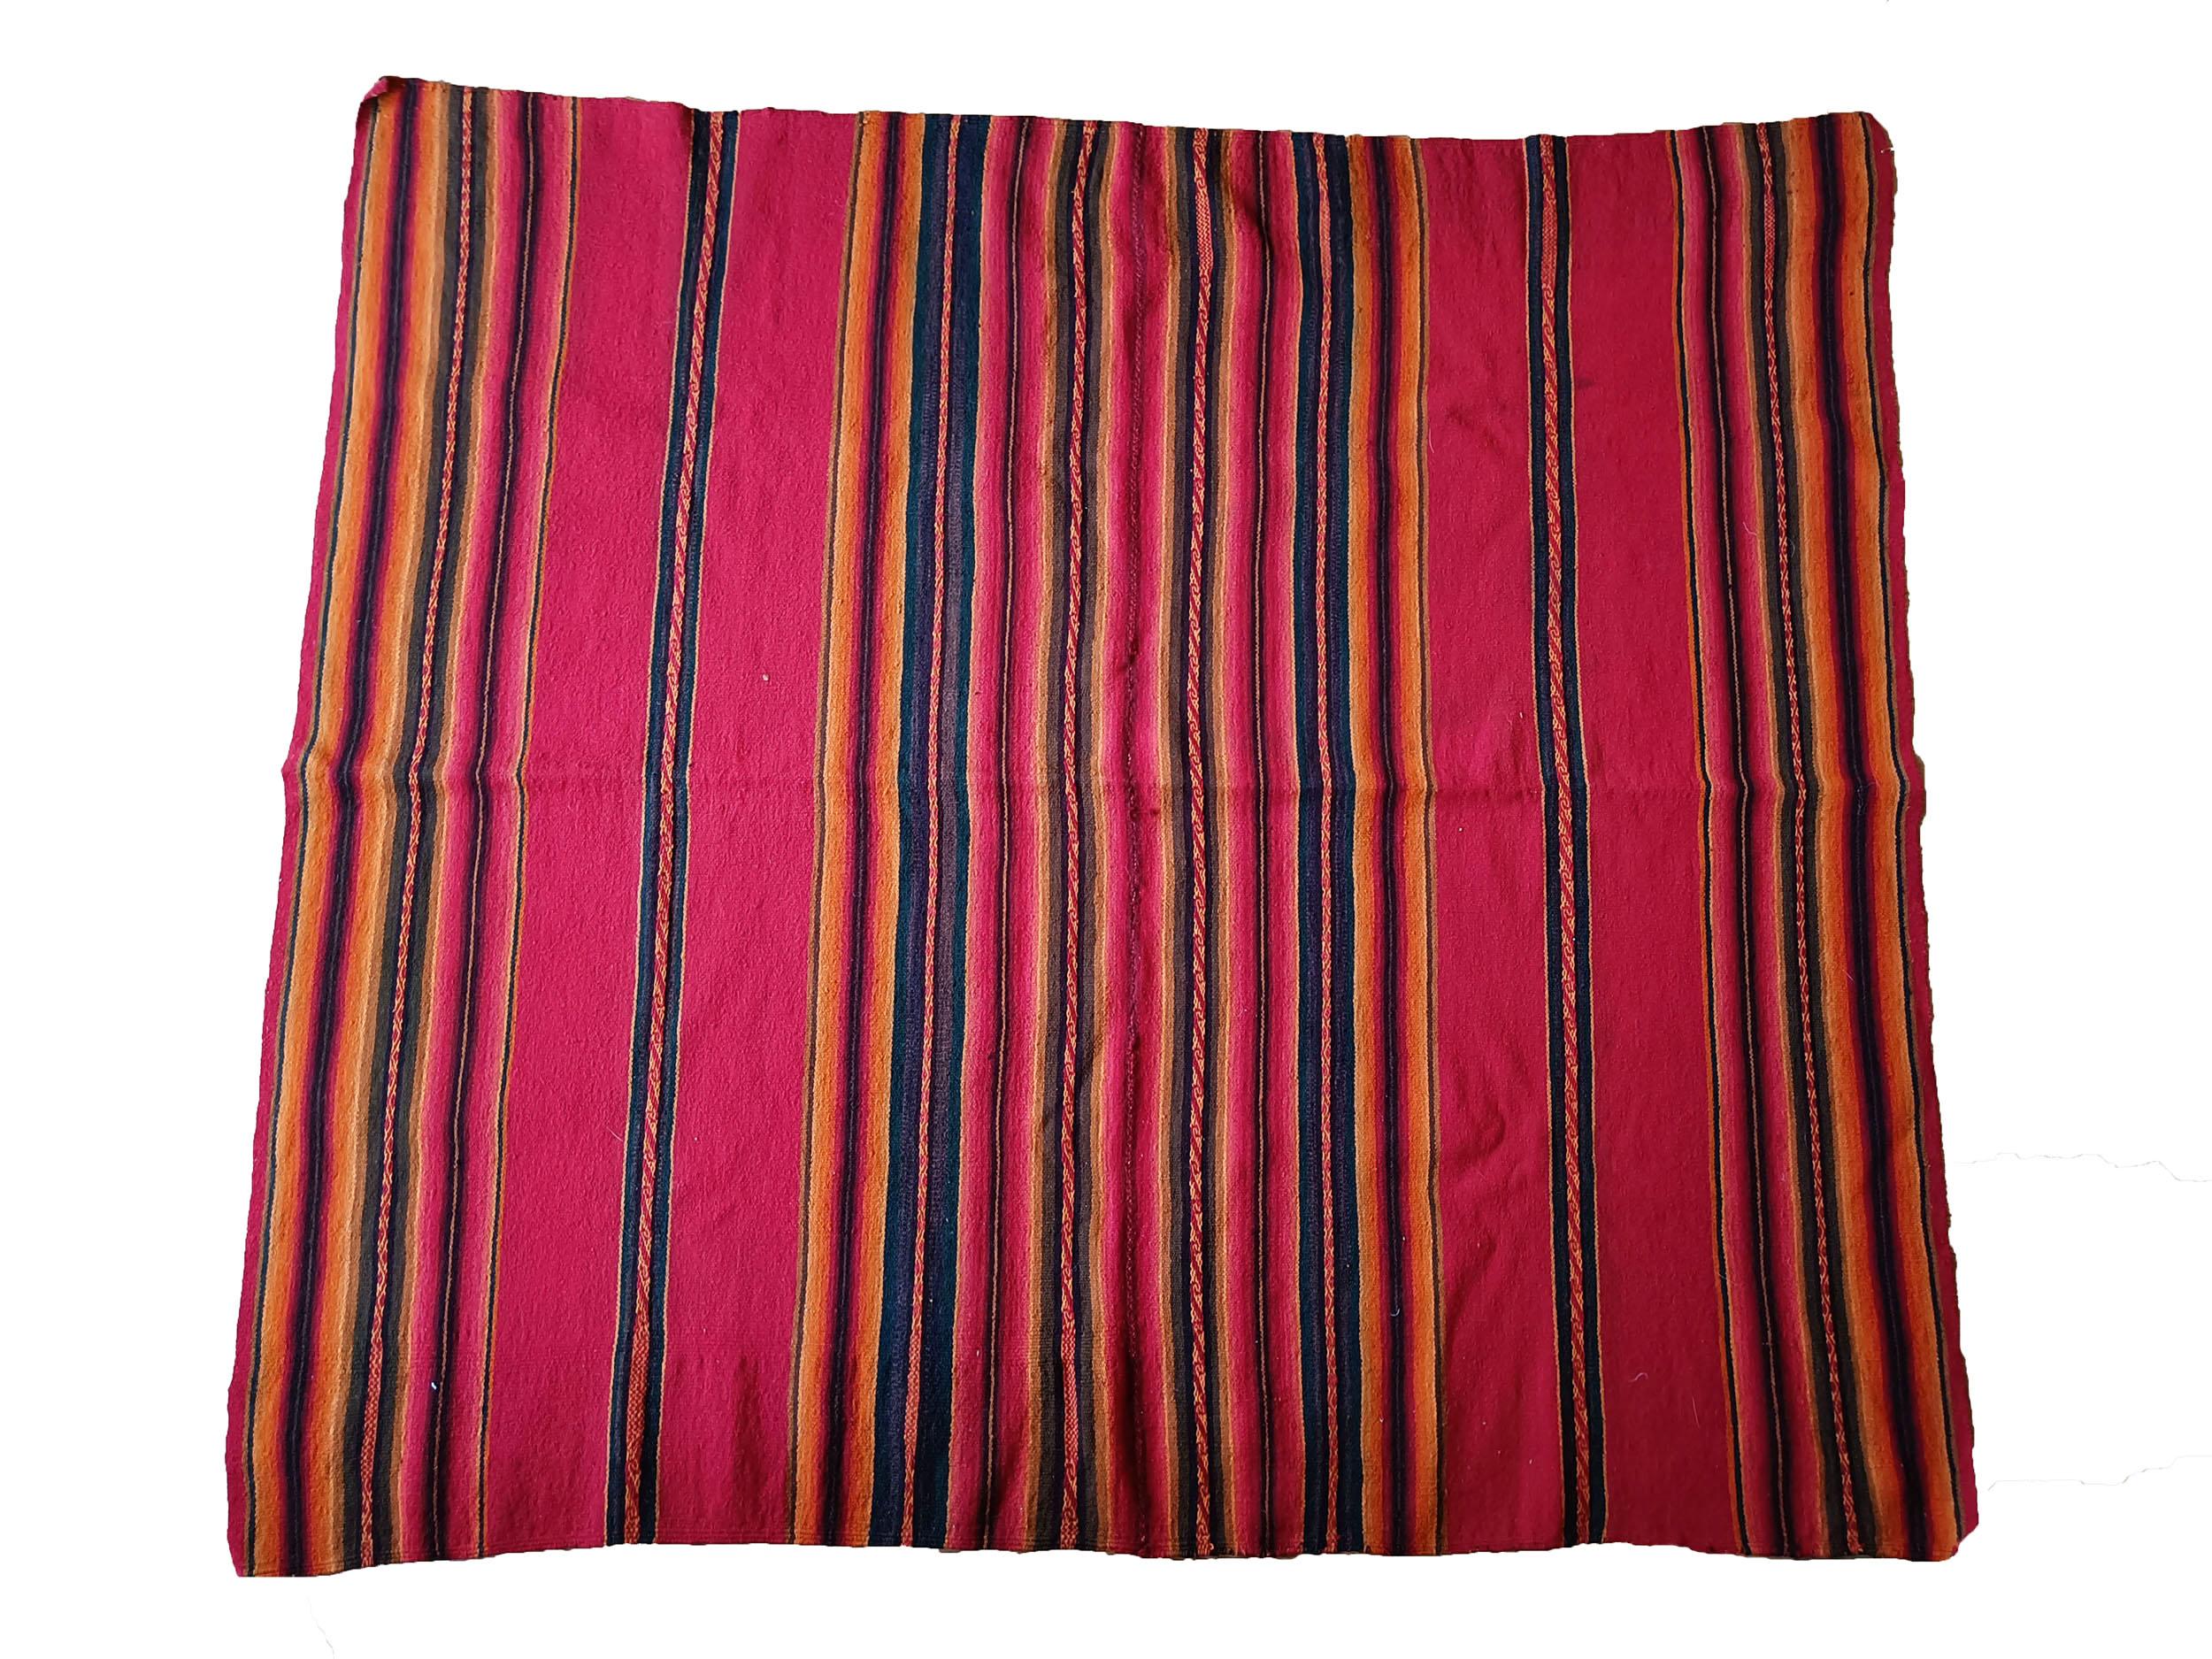 Vintage Andean Peruvian Manta Cloth South American Vintage Textiles.
A very fine Vintage Manta cloth from the High Andes region of Peru Woven in came-lid fibre (Llama wool )beautifully executed in natural dyed colors 
Fine condition, Period 1960's